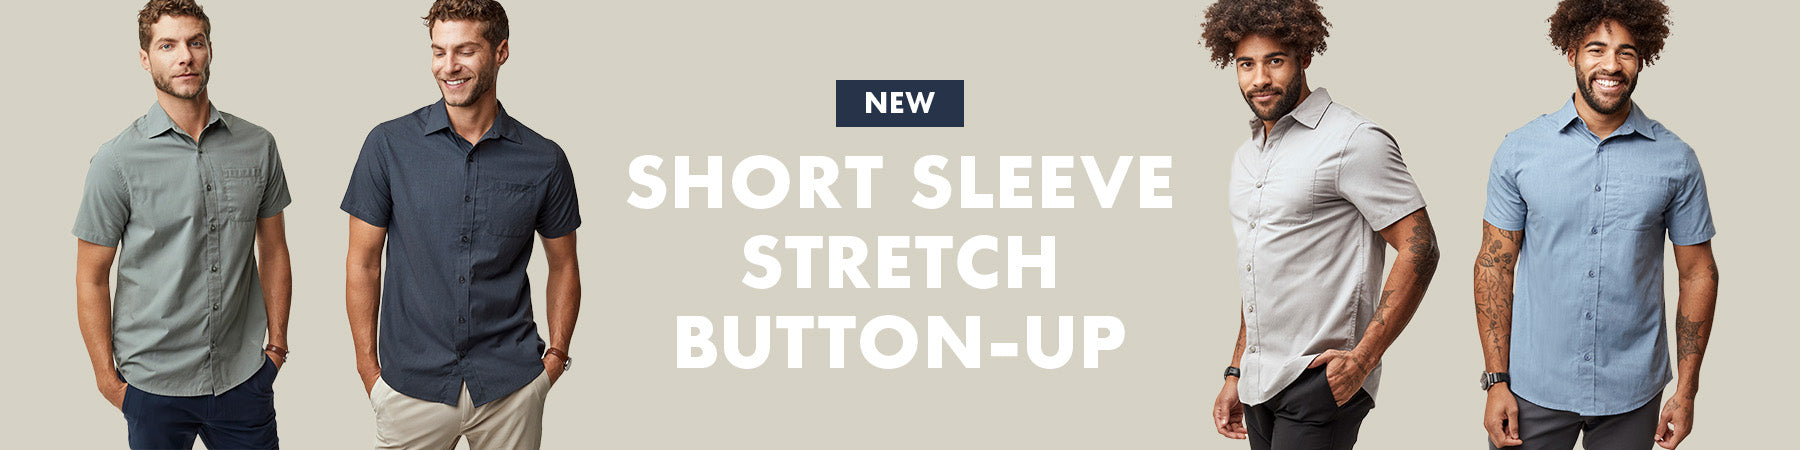 NEW STYLE: Short Sleeve Stretch Button Up | Fresh Clean Threads